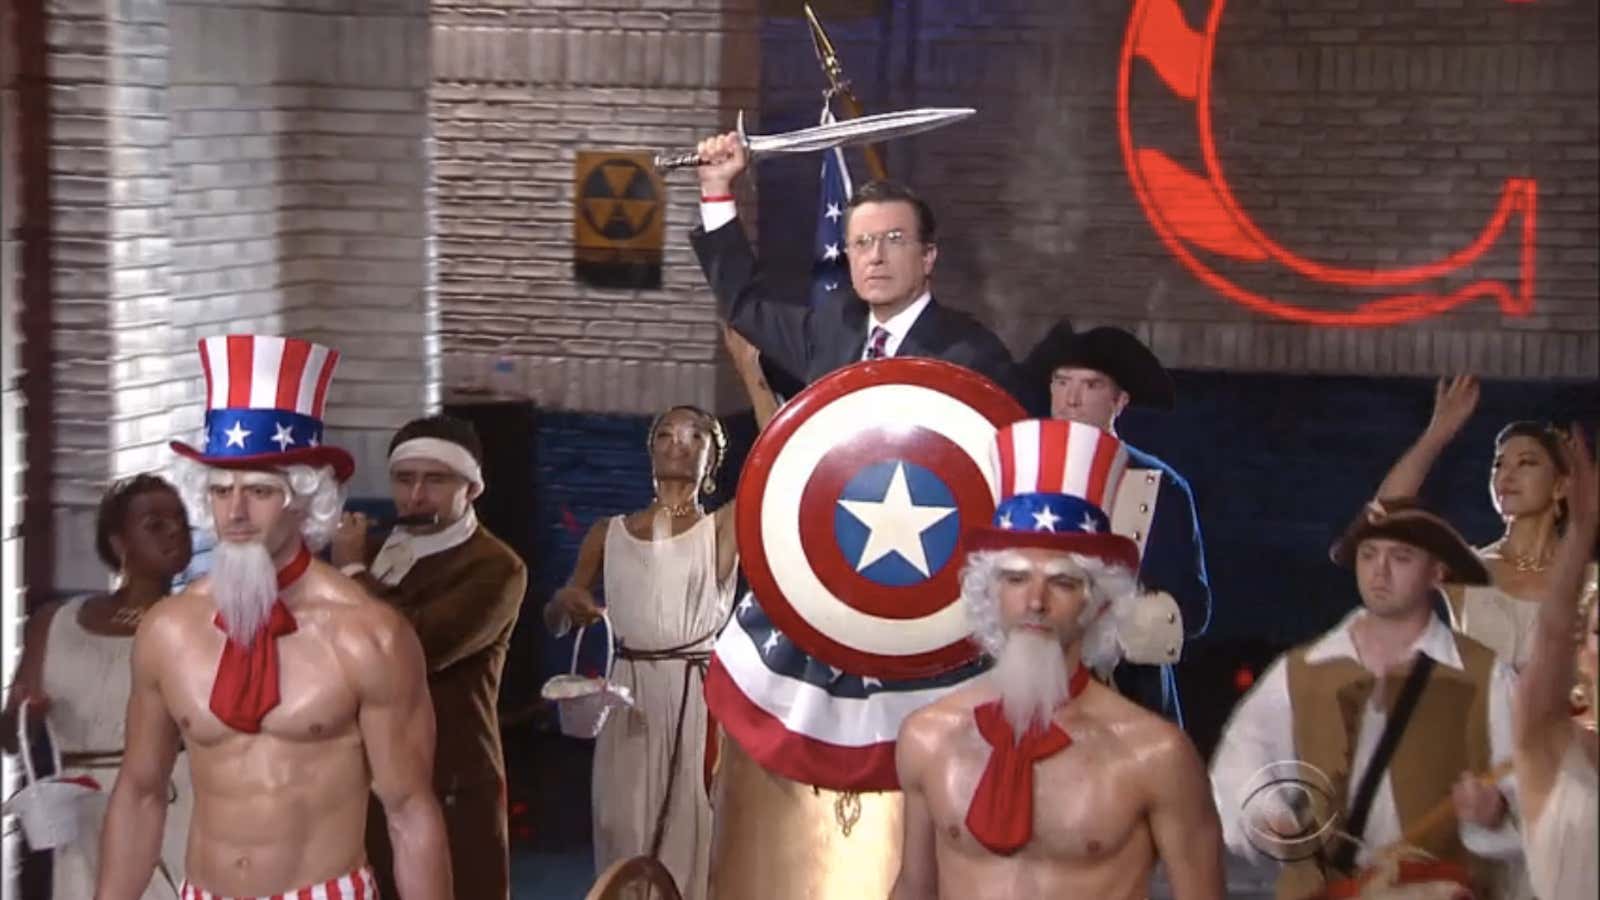 Stephen Colbert’s “Colbert Report” alter ego made an epic return to TV.